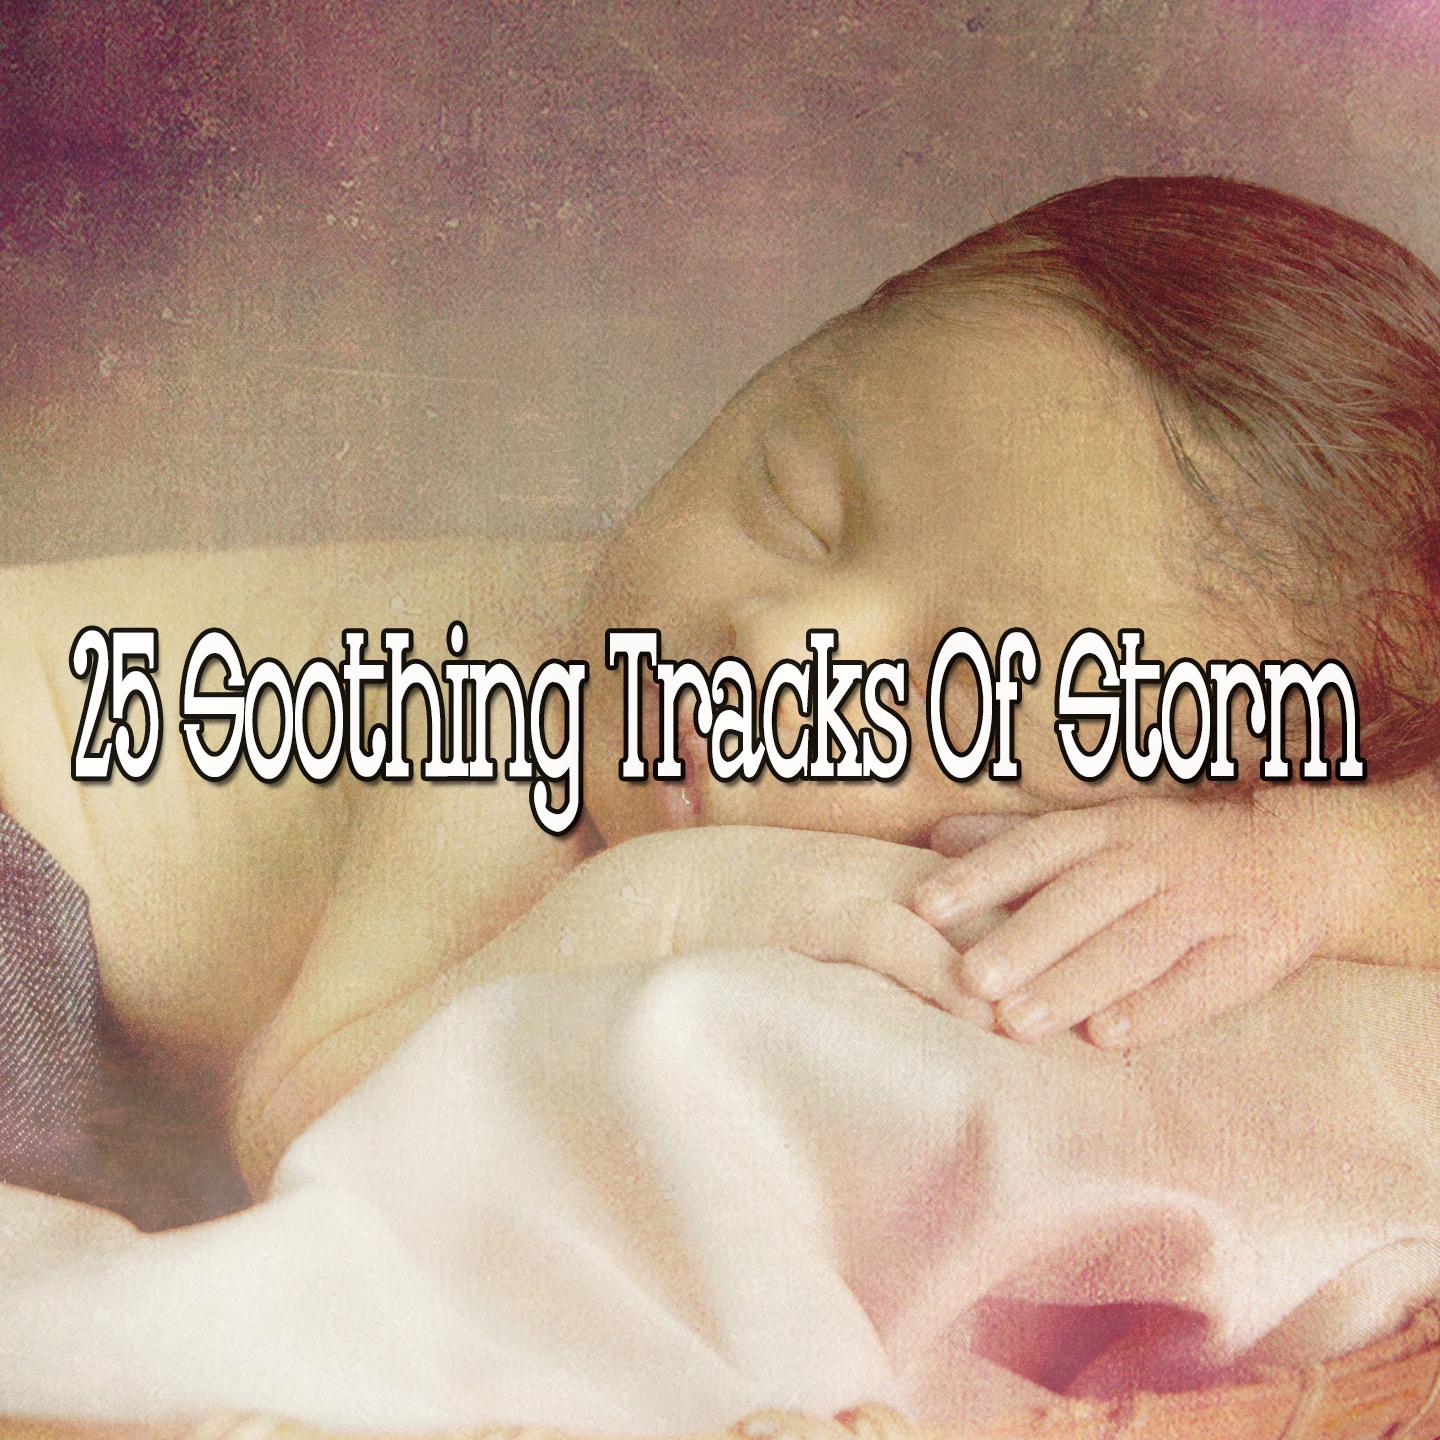 25 Soothing Tracks Of Storm